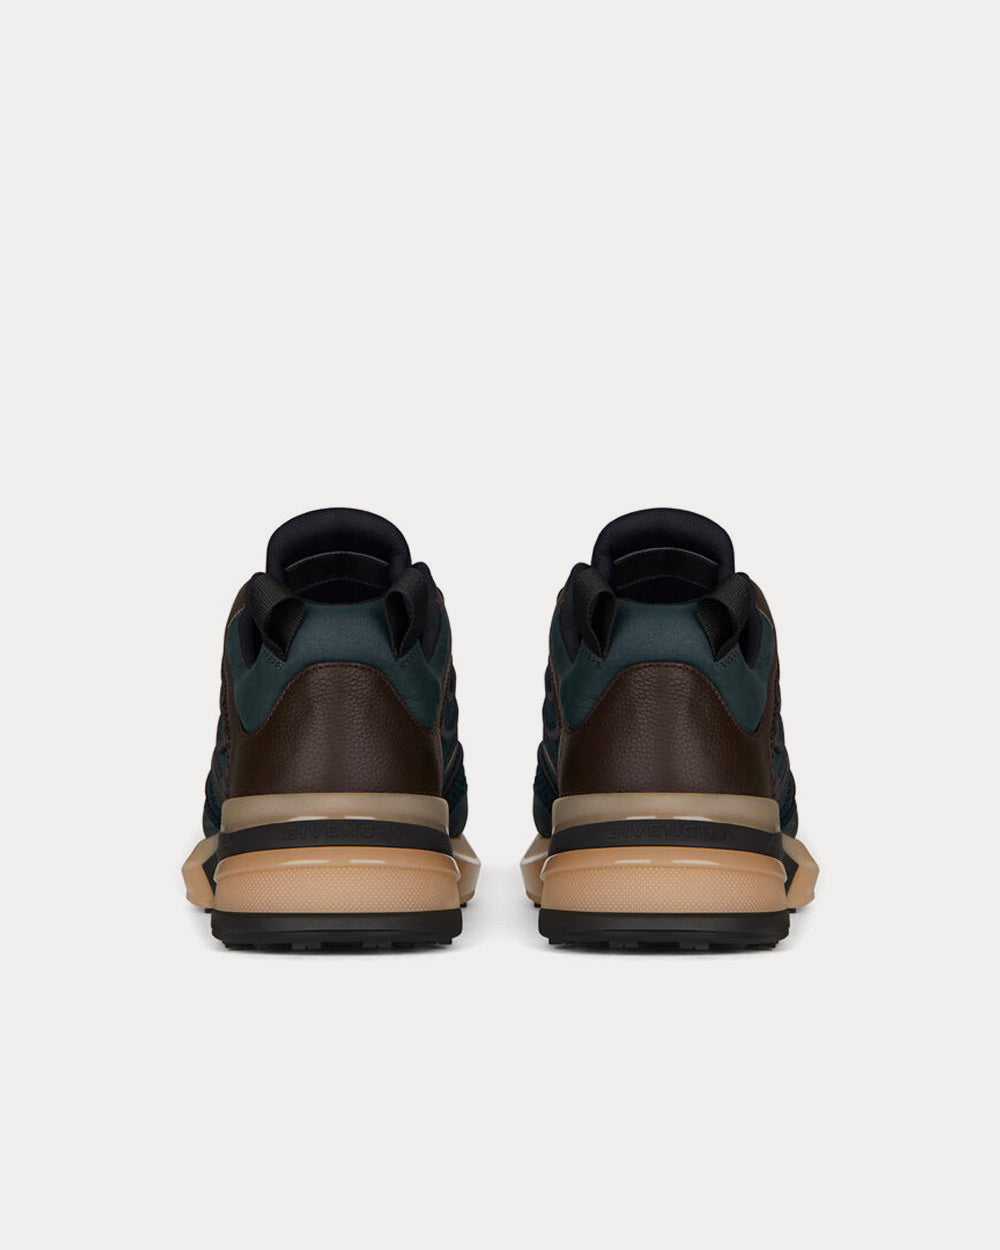 Givenchy - GIV 1 Leather & Mesh Green / Brown Low Top Sneakers